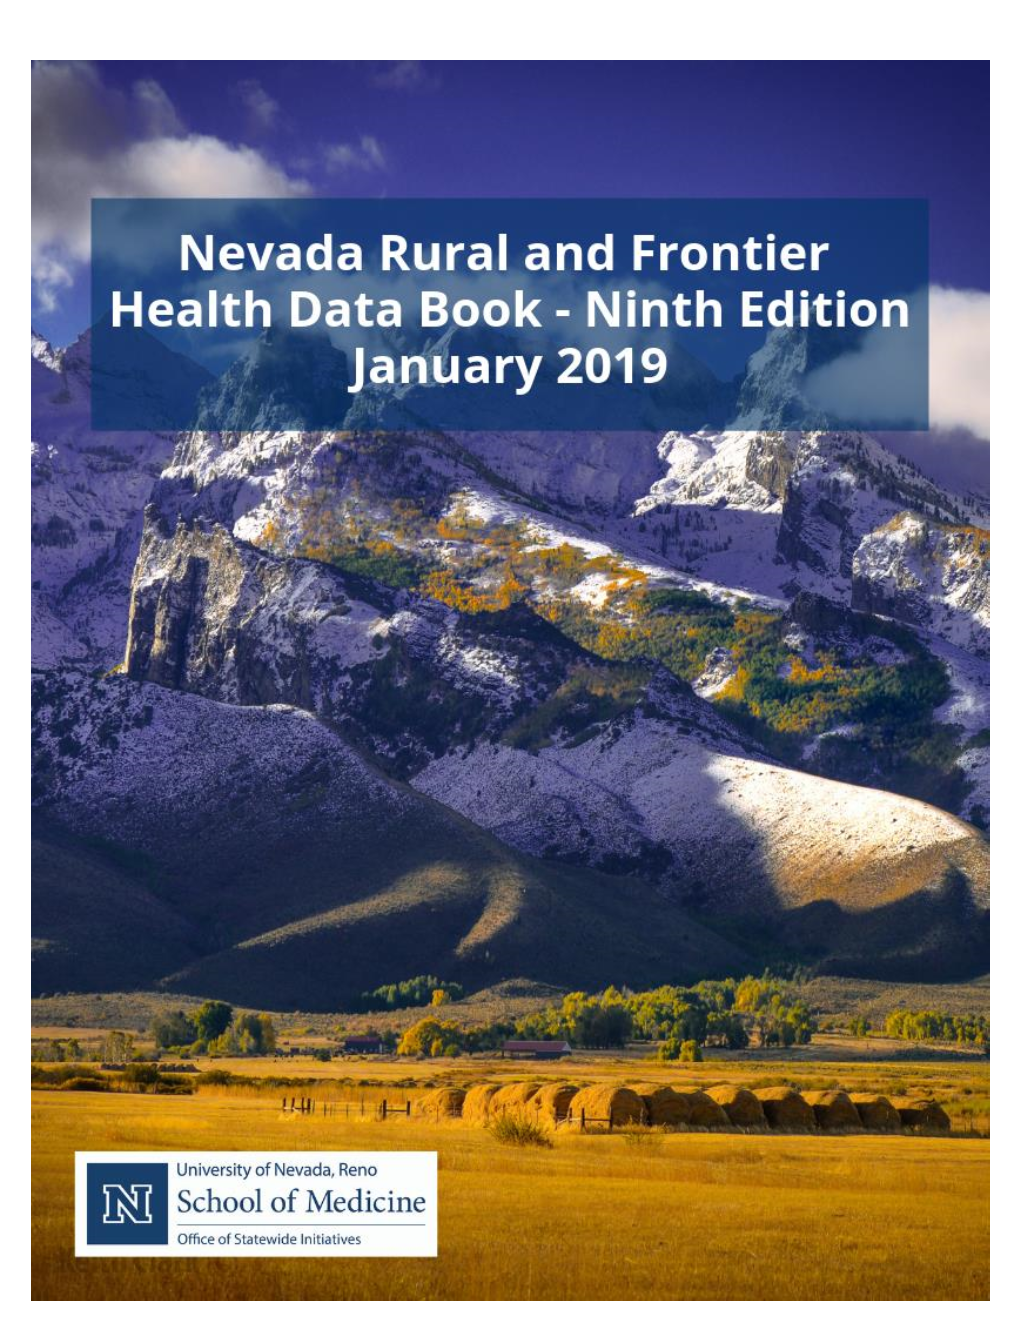 Health Workforce in Nevada: a Chartbook (August 2019)